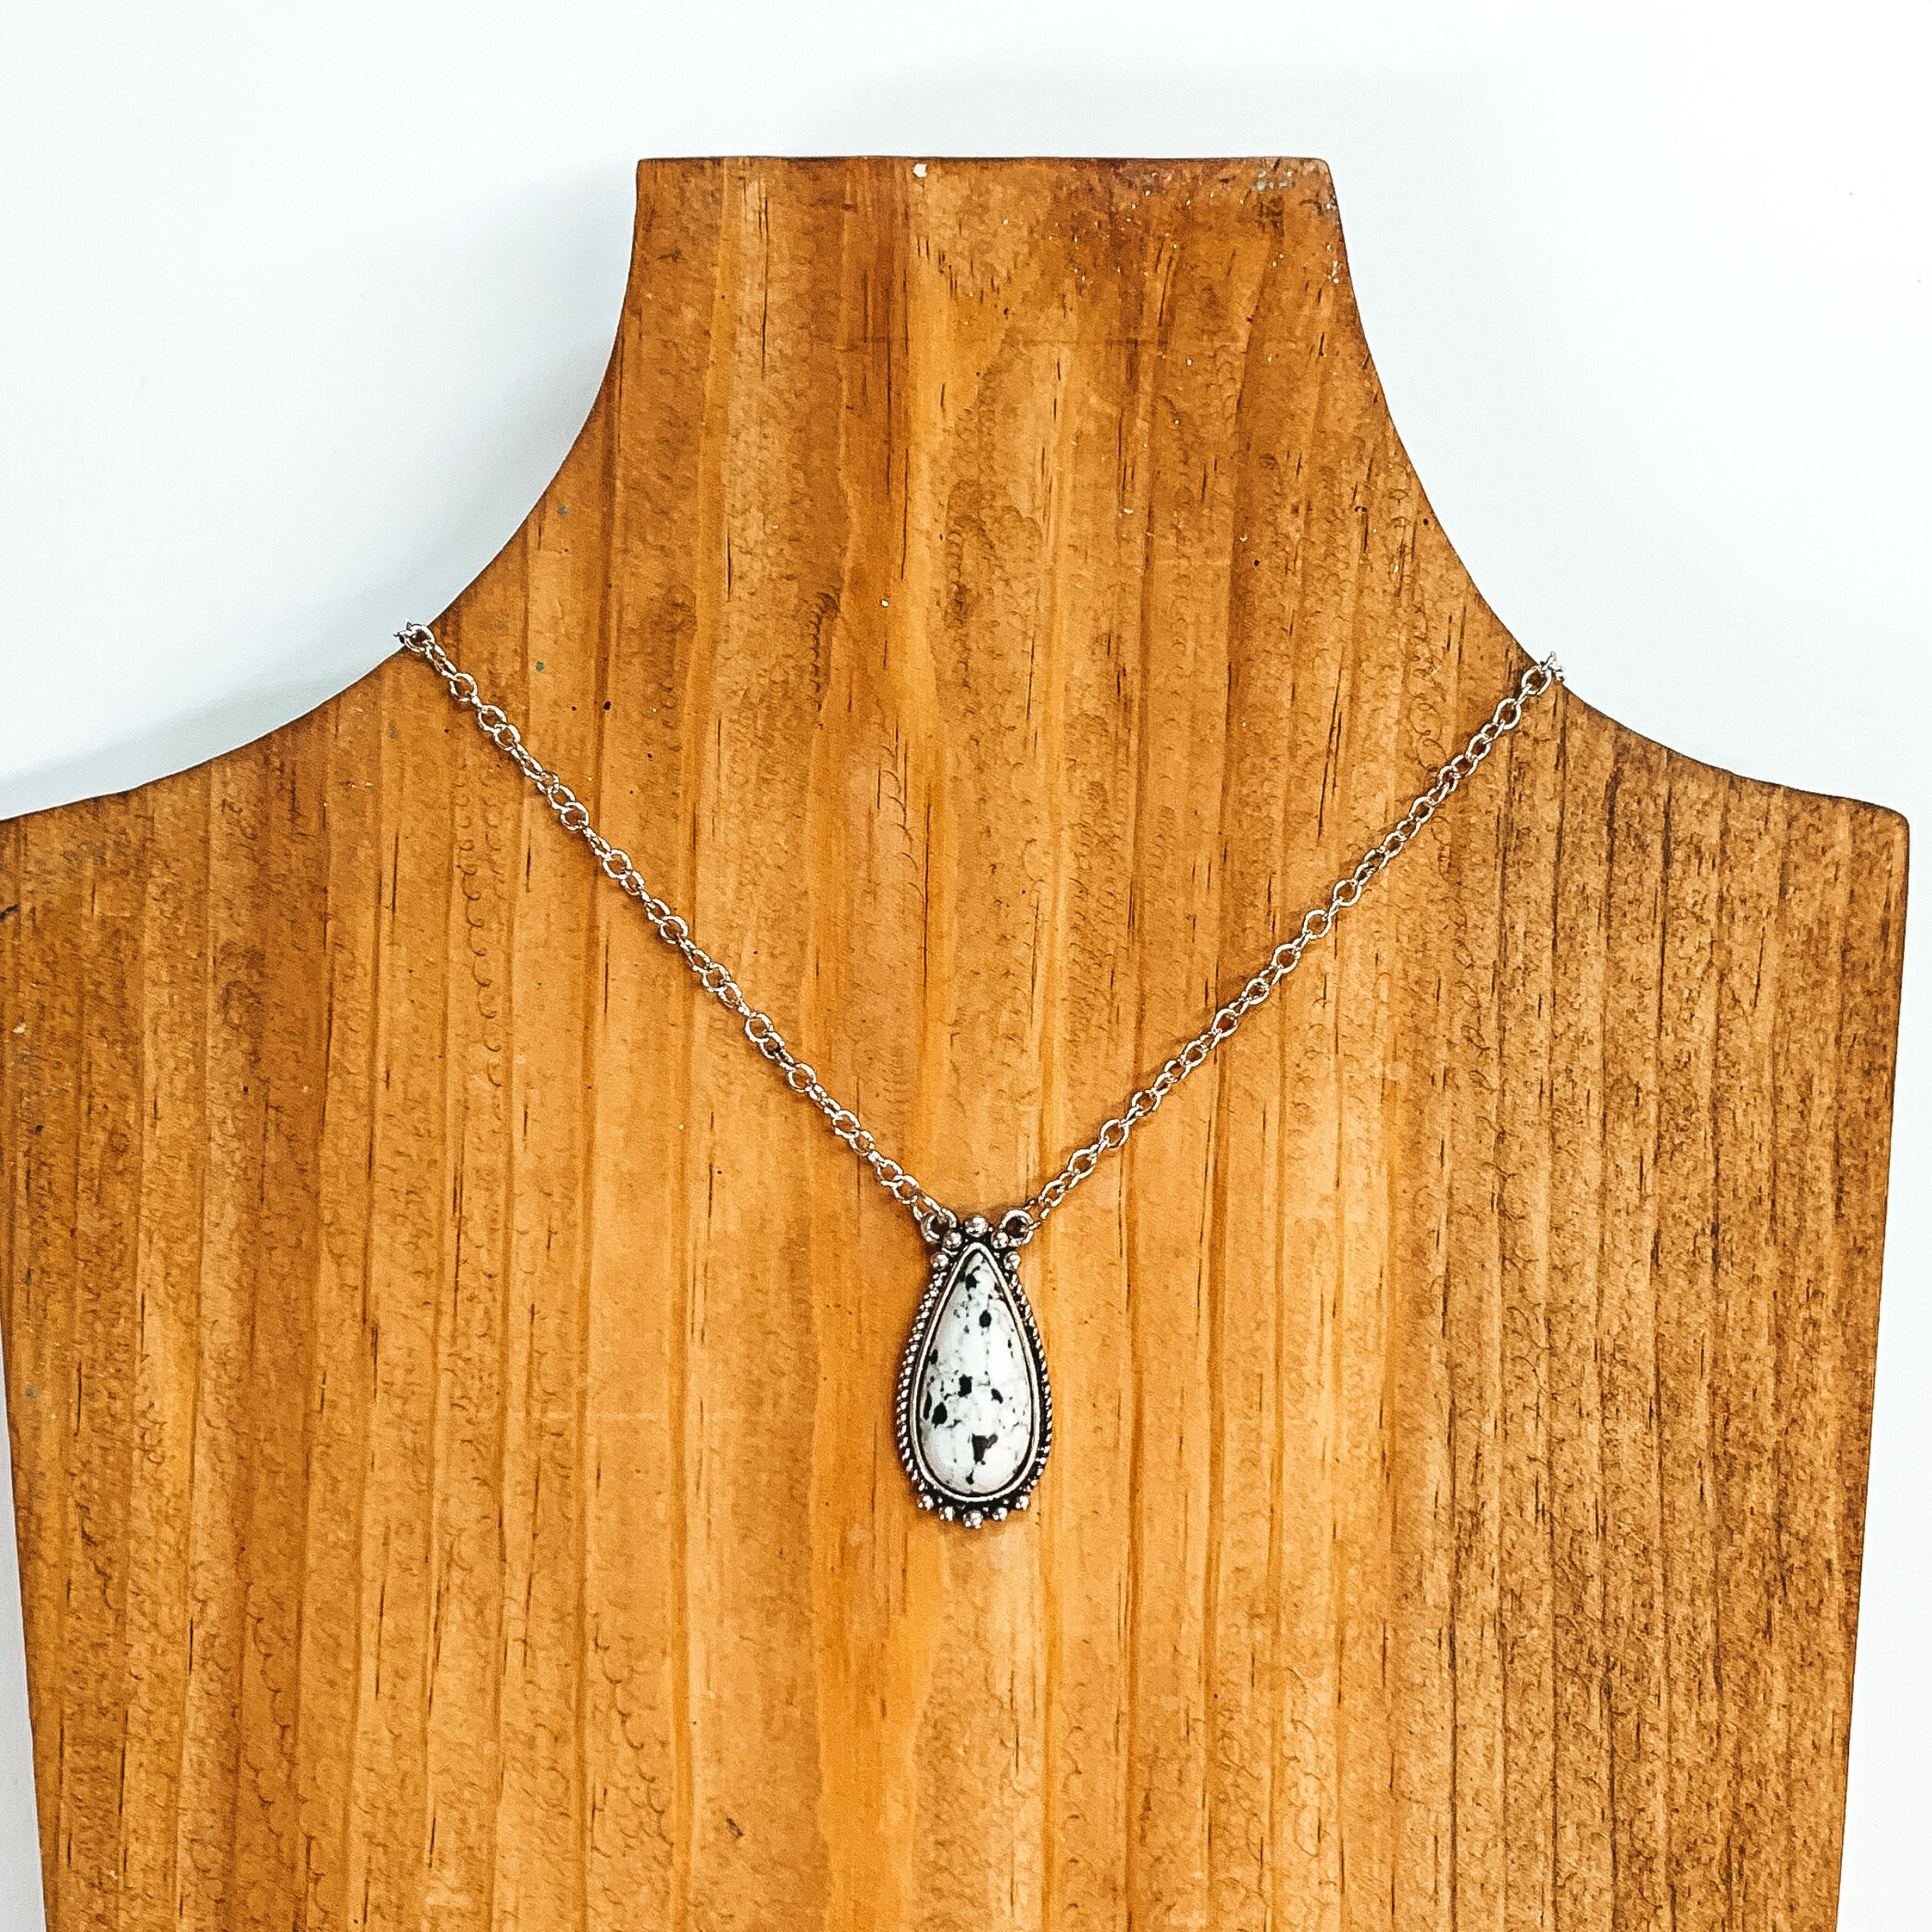 Silver chain necklace with a white teardrop pendant with a silver outline. This necklace is pictured on a wood necklace holder on a white background. 